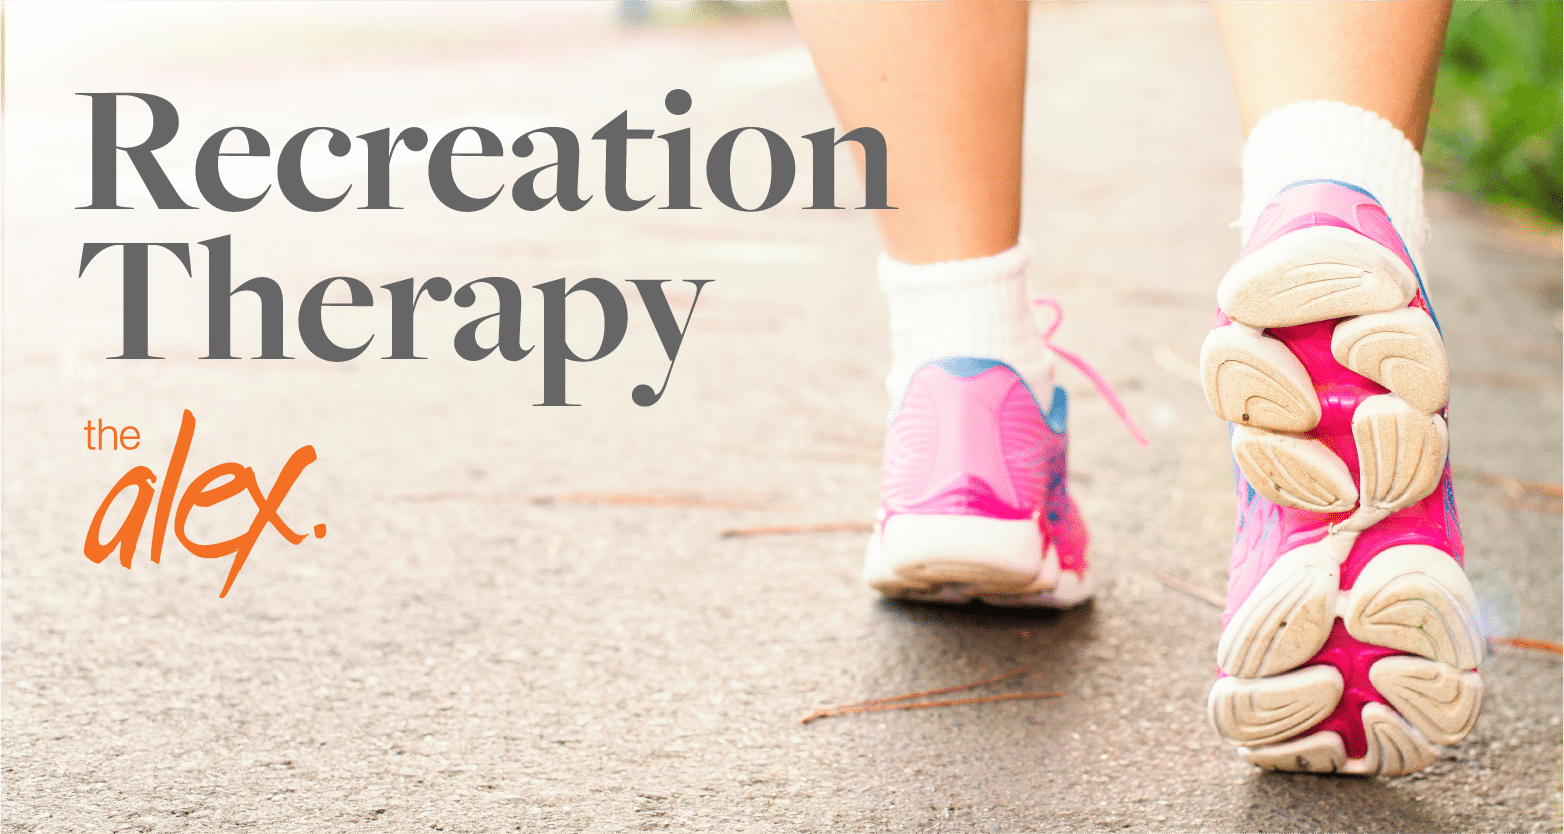 Recreation Therapy Recreation As Therapy The Alex